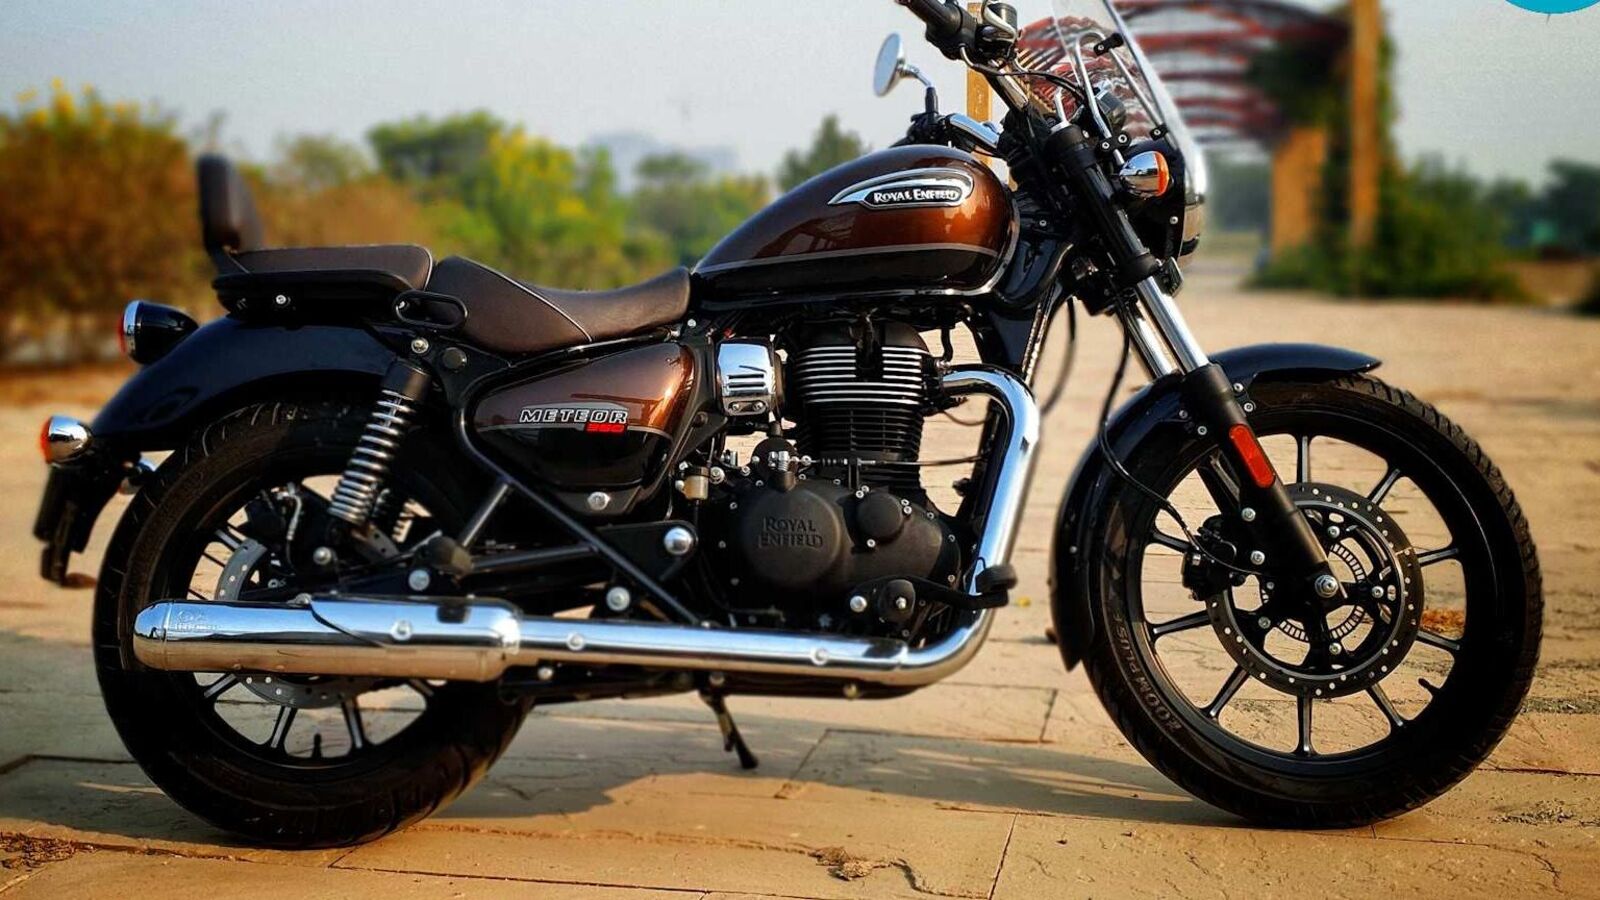 Royal Enfield bikes get costlier in India. Check new prices here HT Auto